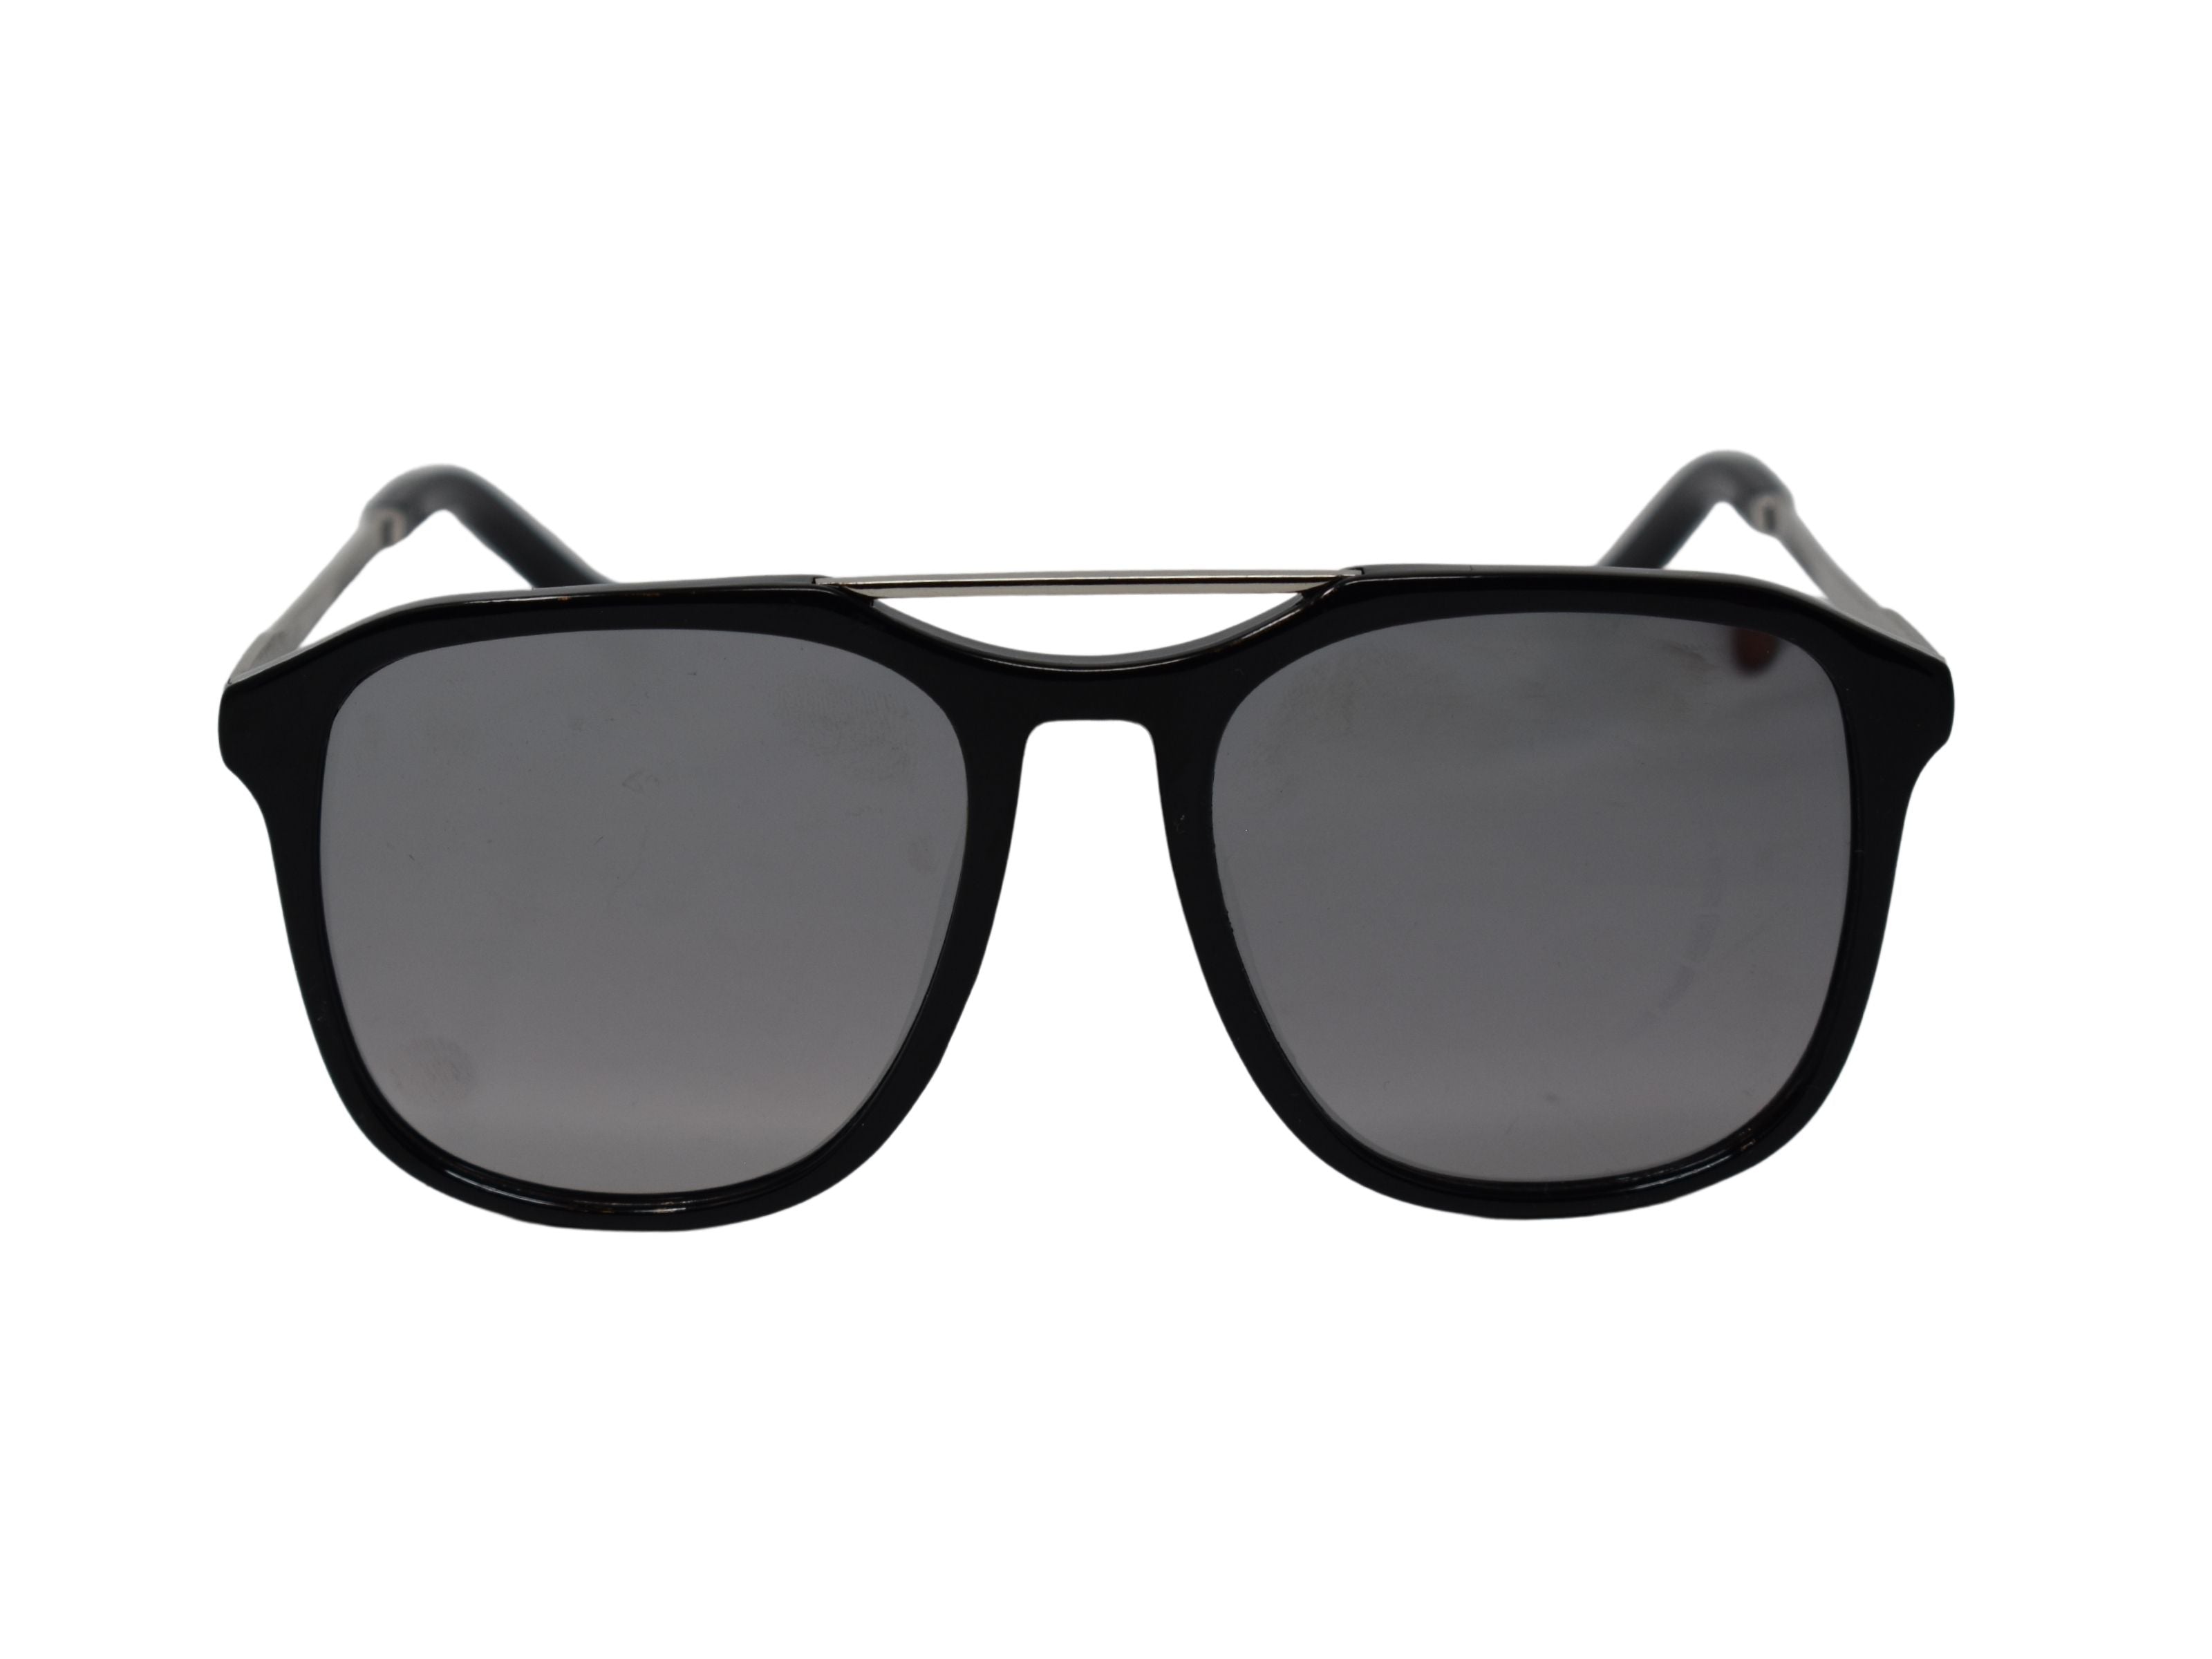 Bring an instant chic appeal with our stylish Breita Black aviator sunglasses with silver lens.